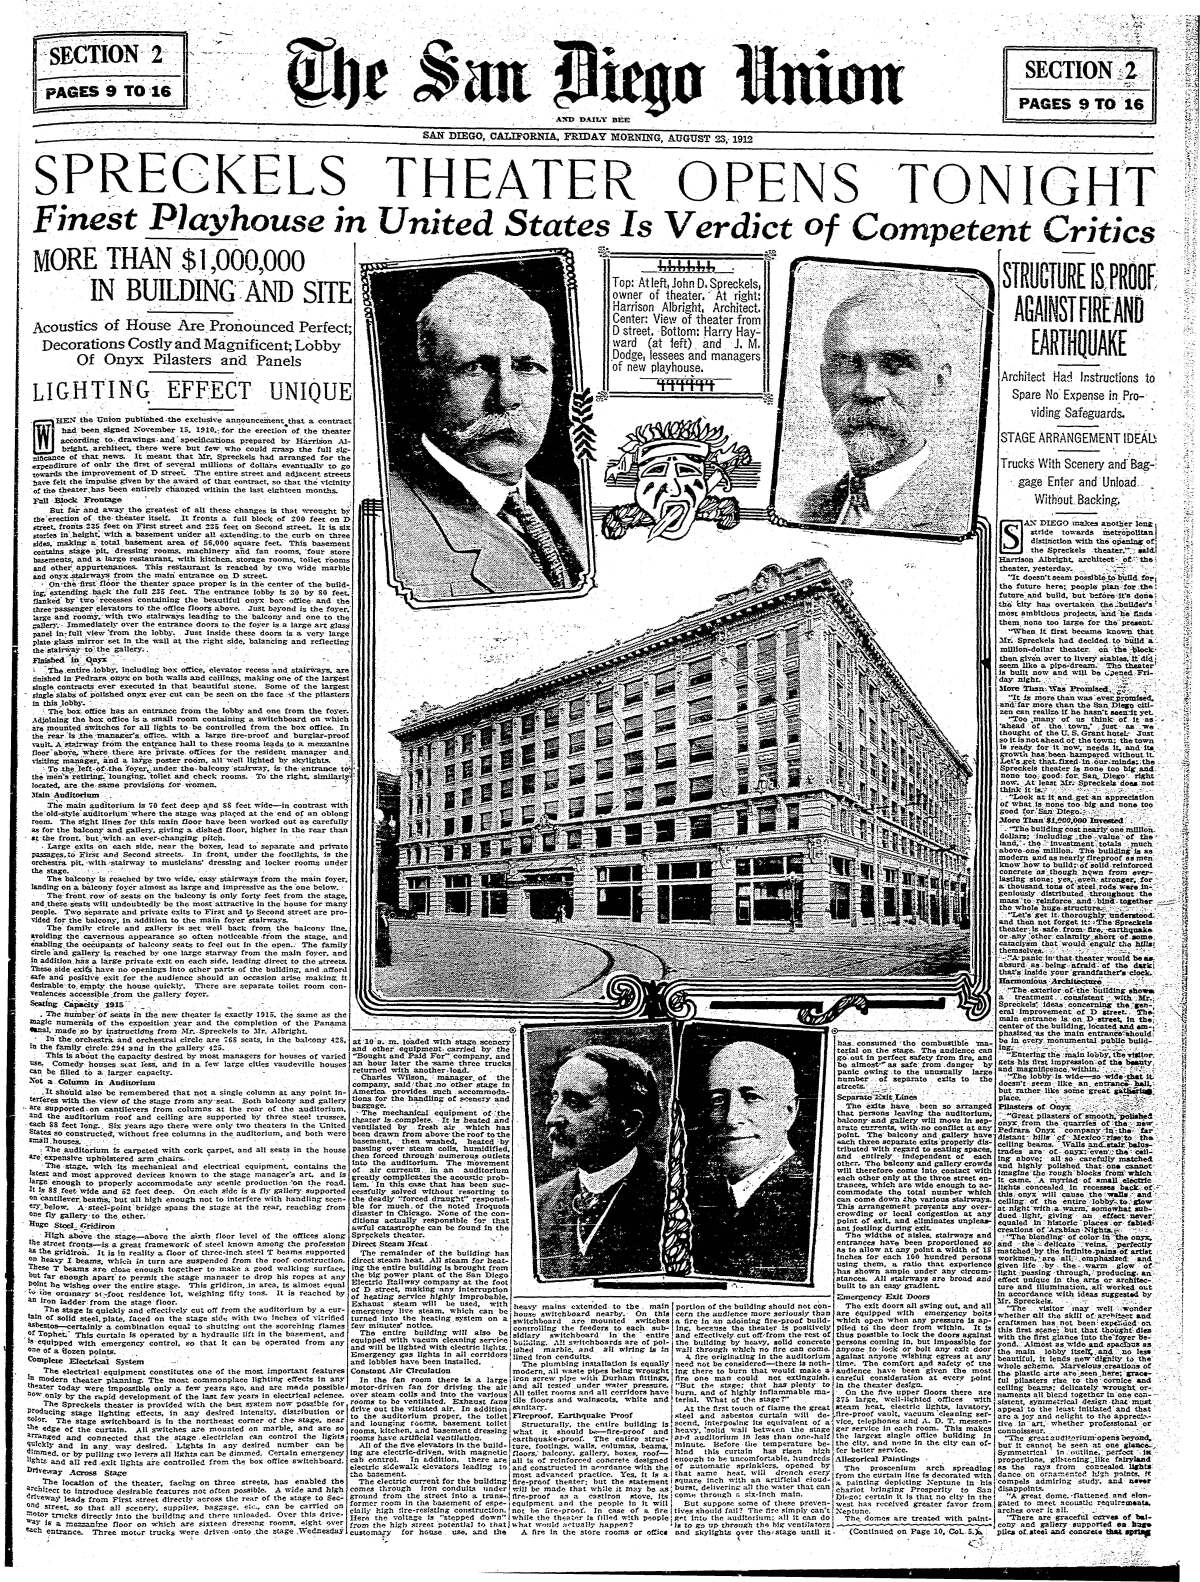 Page from The San Diego Union, Friday, August 23, 1912.